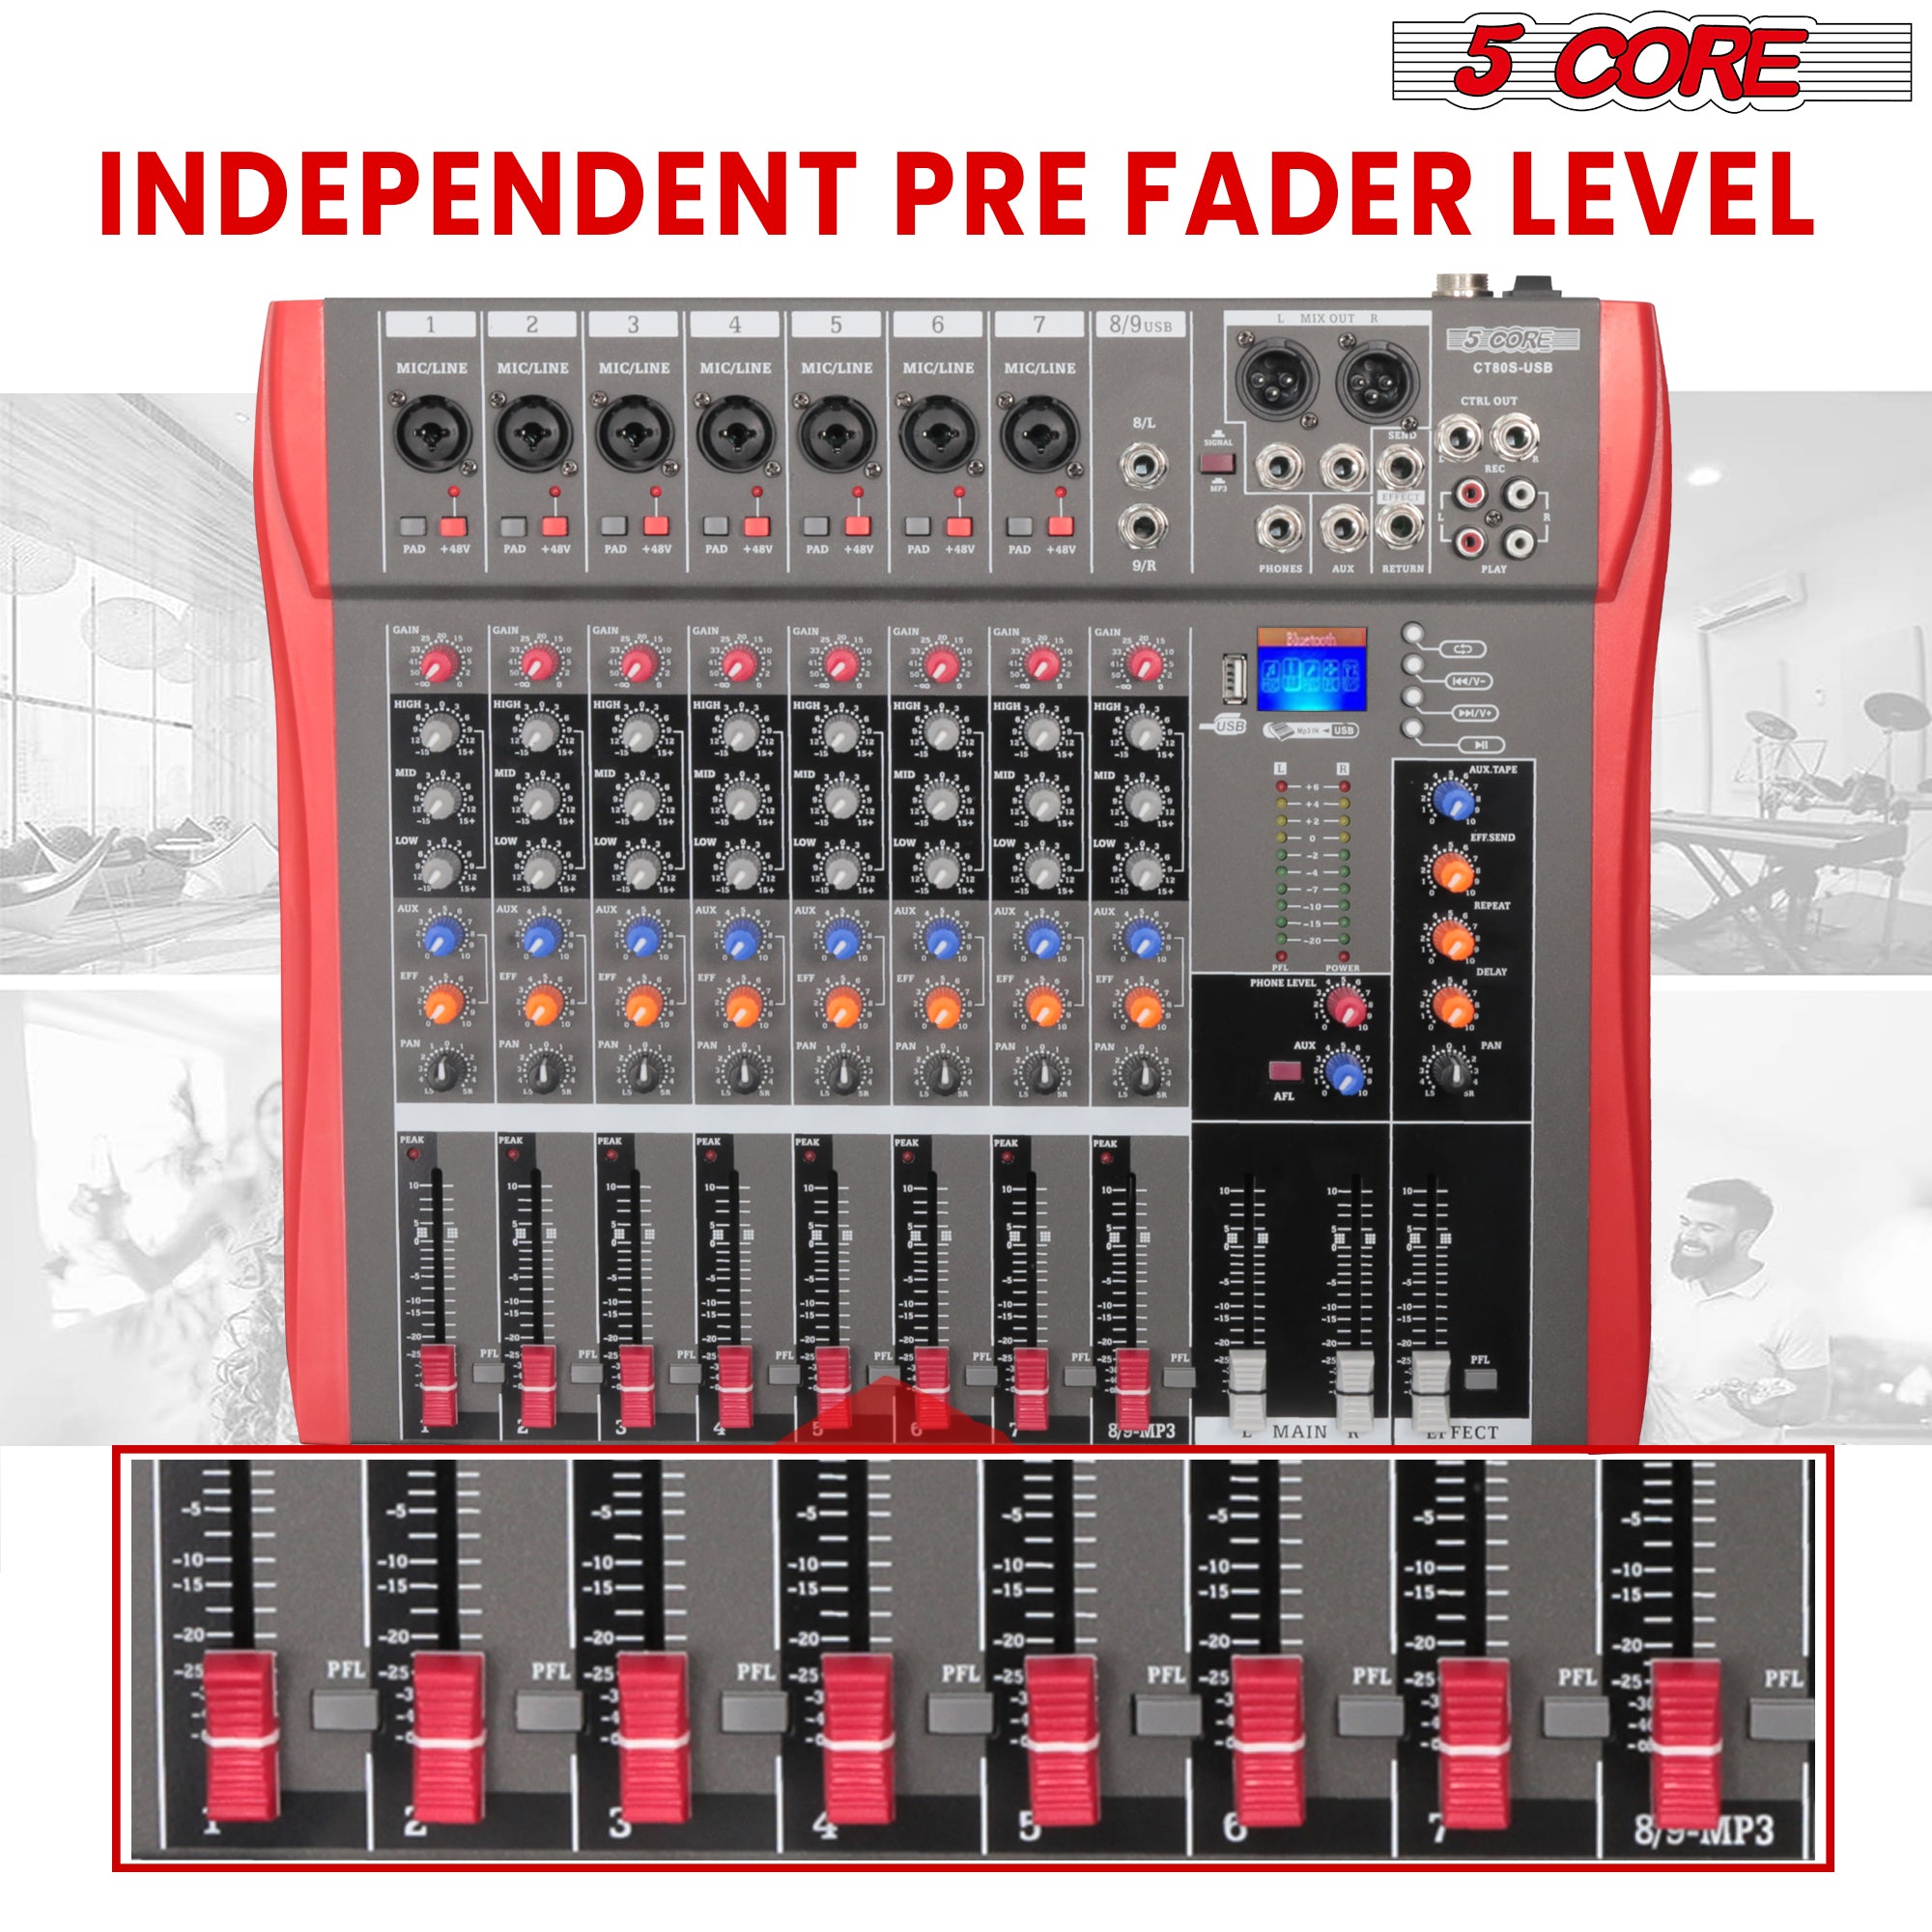 This Audio Mixer has Independent Pre Feder Level.